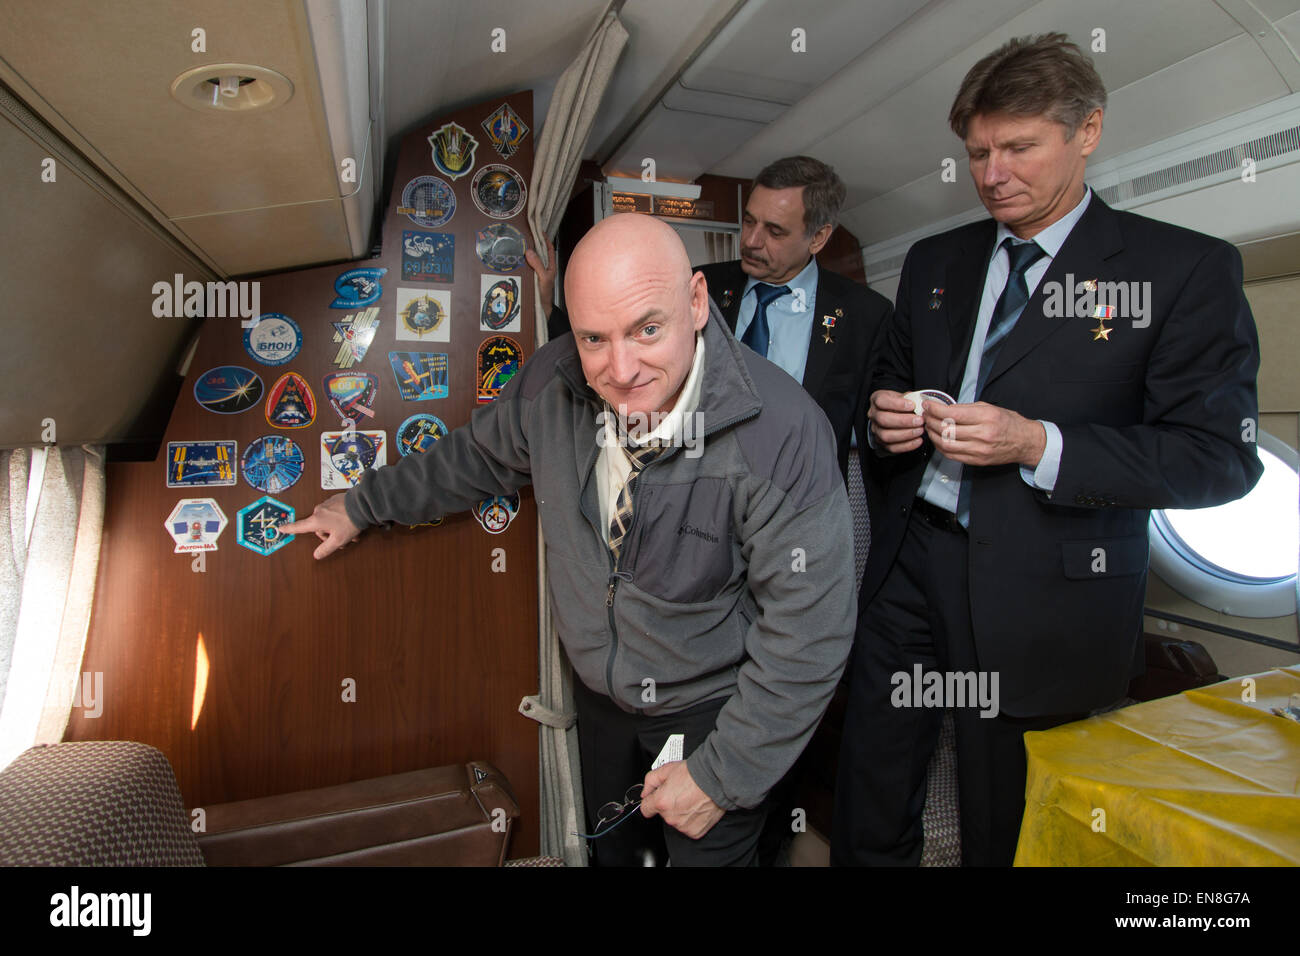 Expedition 43 NASA Astronaut Scott Kelly, points to his Expedition 43 crew mission patch after placing it on the  the Gagarin Cosmonaut Training Center (GCTC) aircraft during his flight from Star City, Russia, to Baikonur, Kazakhstan, with fellow crew members, Russian Cosmonauts Mikhail Kornienko, center, and Gennady Padalka of the Russian Federal Space Agency (Roscosmos), Saturday, March 14, 2015. The trio are preparing for launch to the International Space Station in their Soyuz TMA-16M spacecraft from the Baikonur Cosmodrome in Kazakhstan March 28, Kazakh time. As the one-year crew, Kelly a Stock Photo